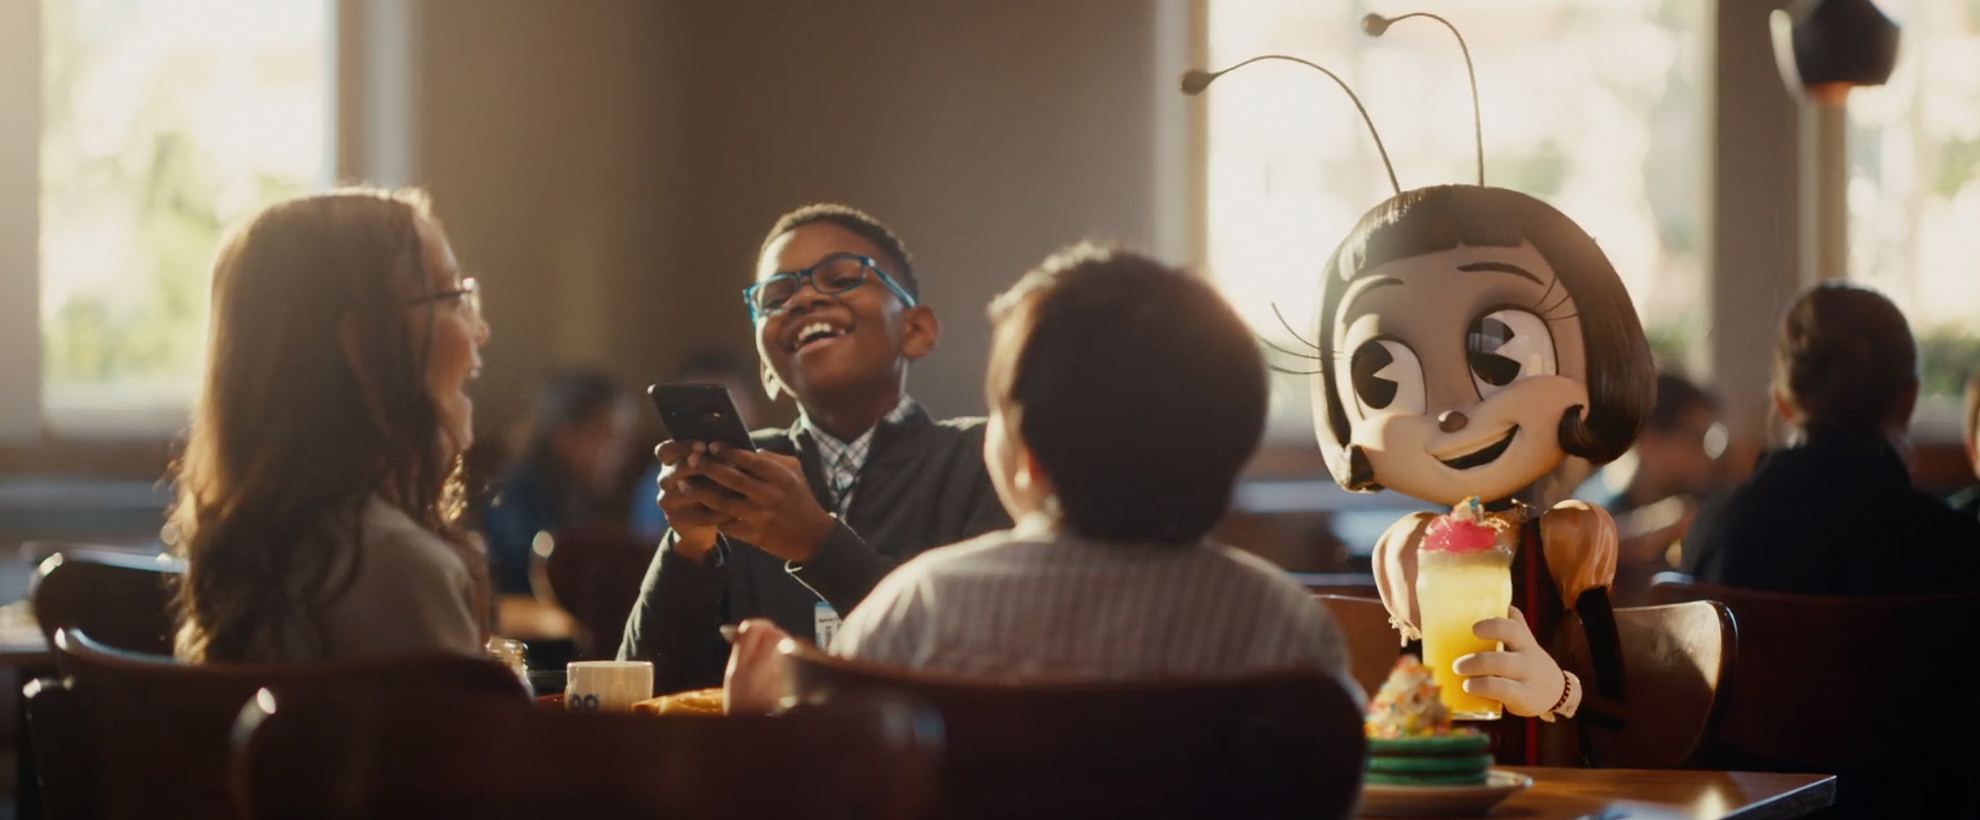 A character from the film IF sits at a table in an IHOP restaurant with a group of children in suits